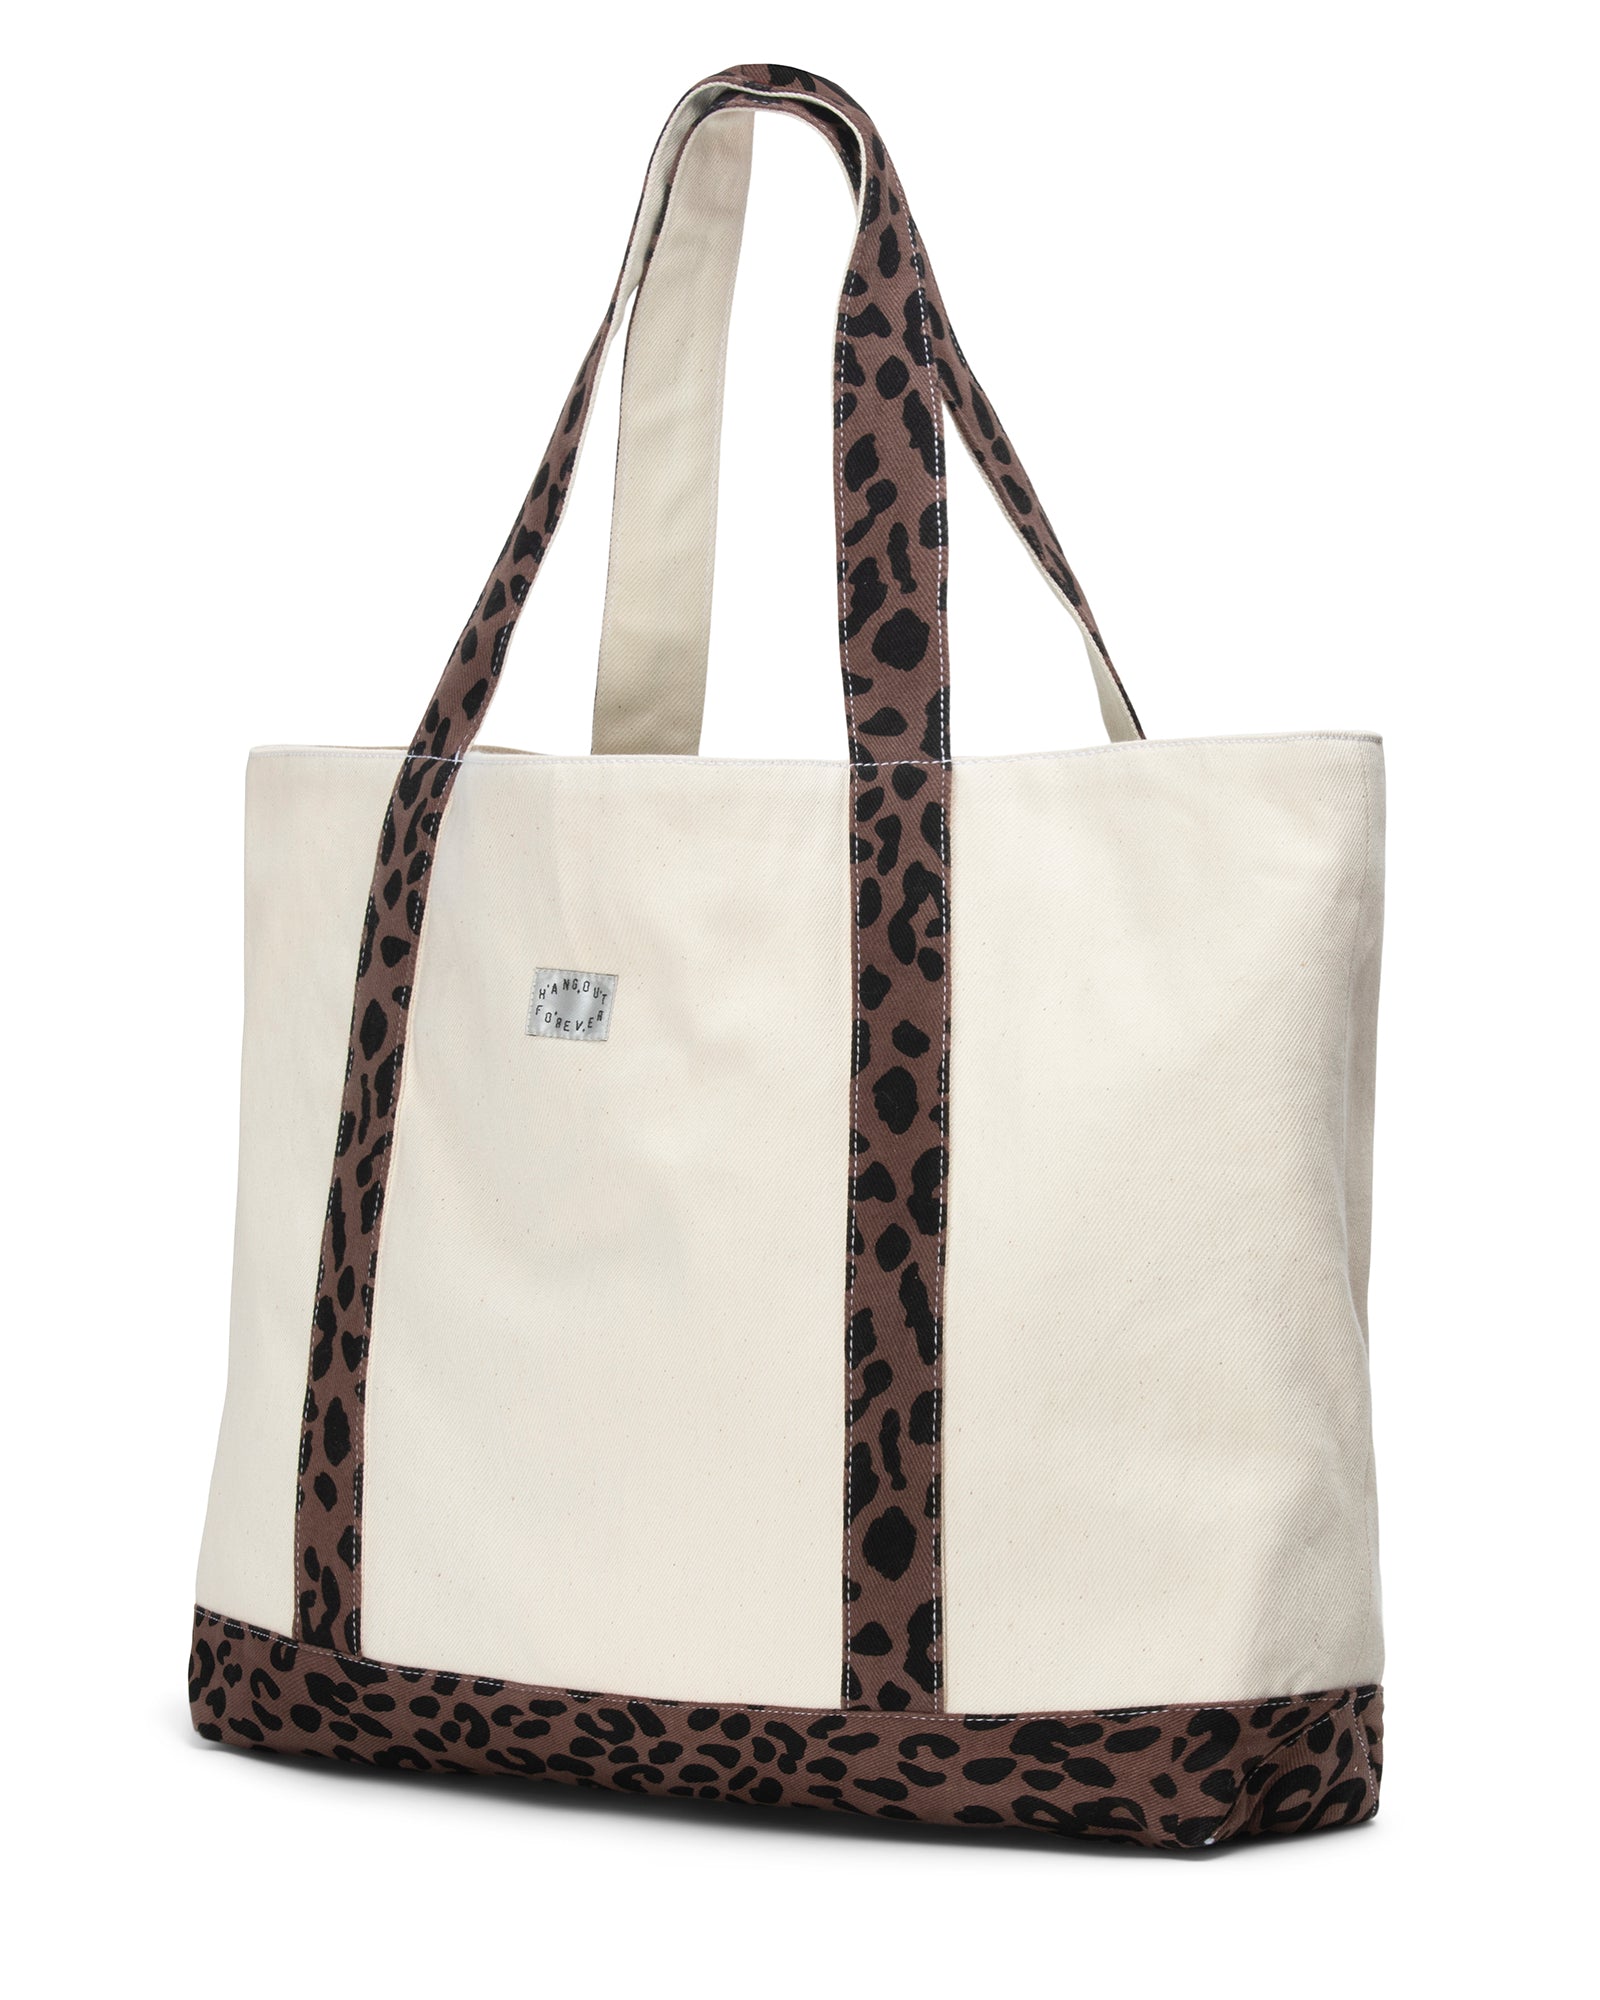 Black Leopard Tote Bag – Andrea's Lifestyle & Gifts